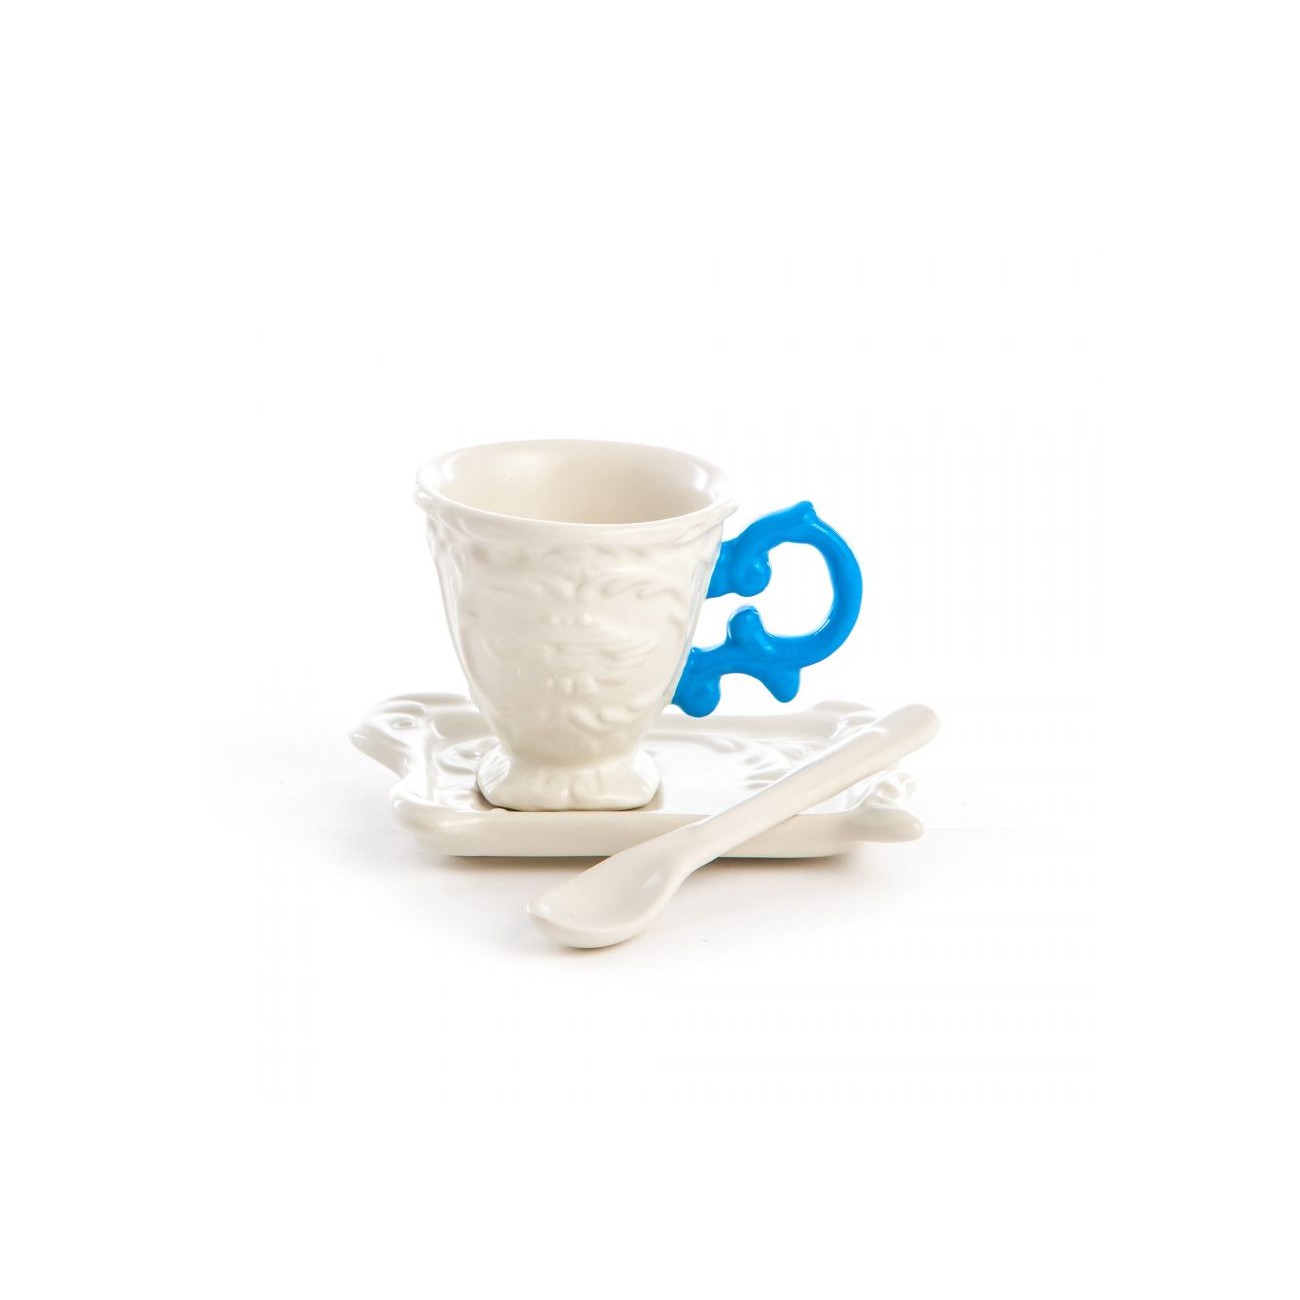 SELETTI I-Wares Small coffee cup - Blue